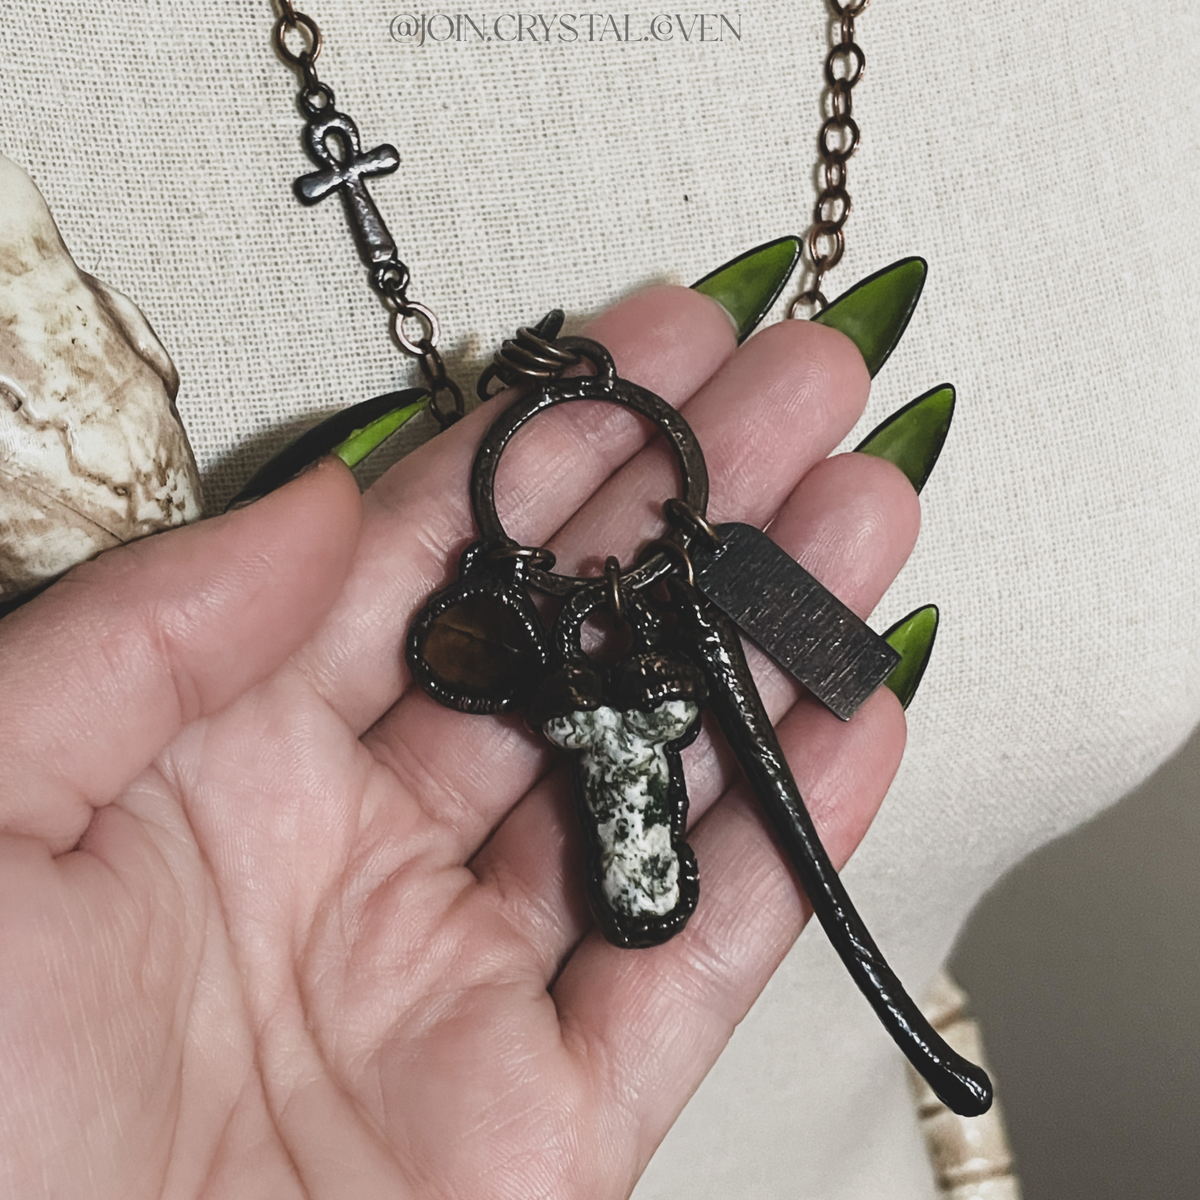 The Witch Charms – Crystal Coven